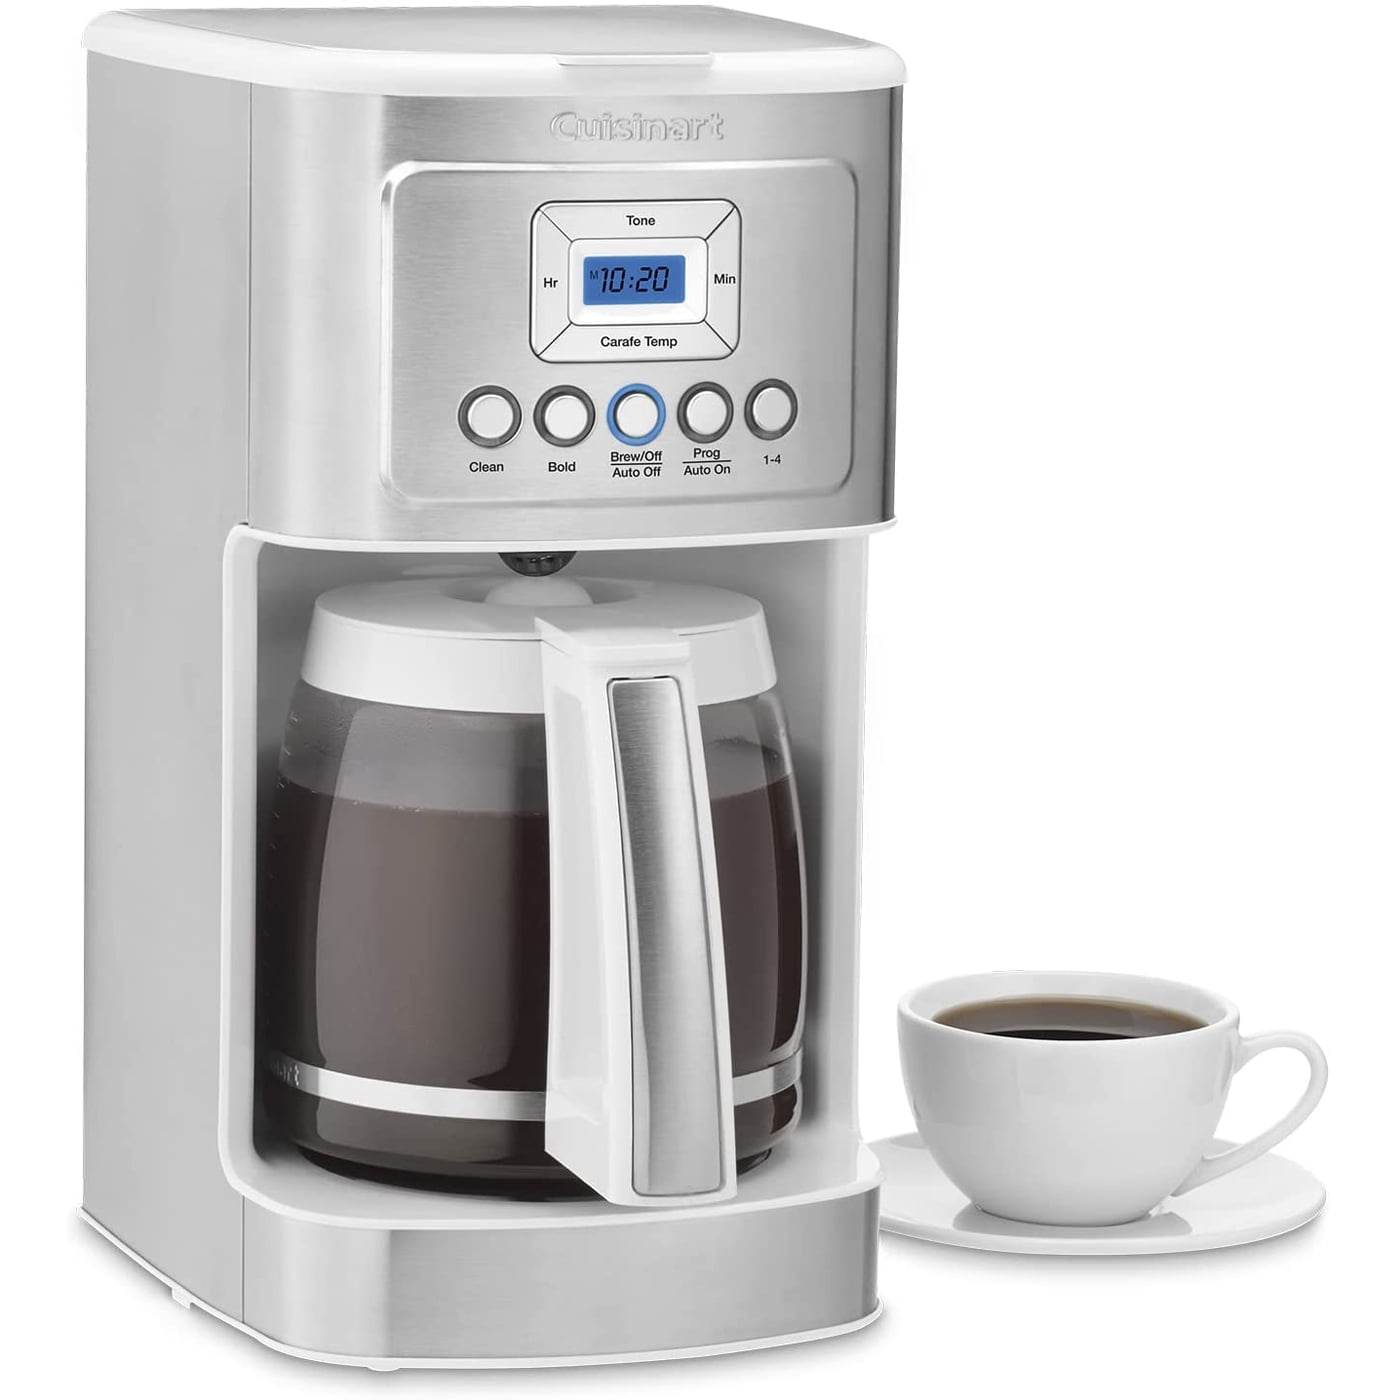 Cuisinart Single Serve Coffee Maker with Built-in Filter and Auto-Shut Off  Bundle with Coffee 24-count breakfast blend and Colombian Roast Single